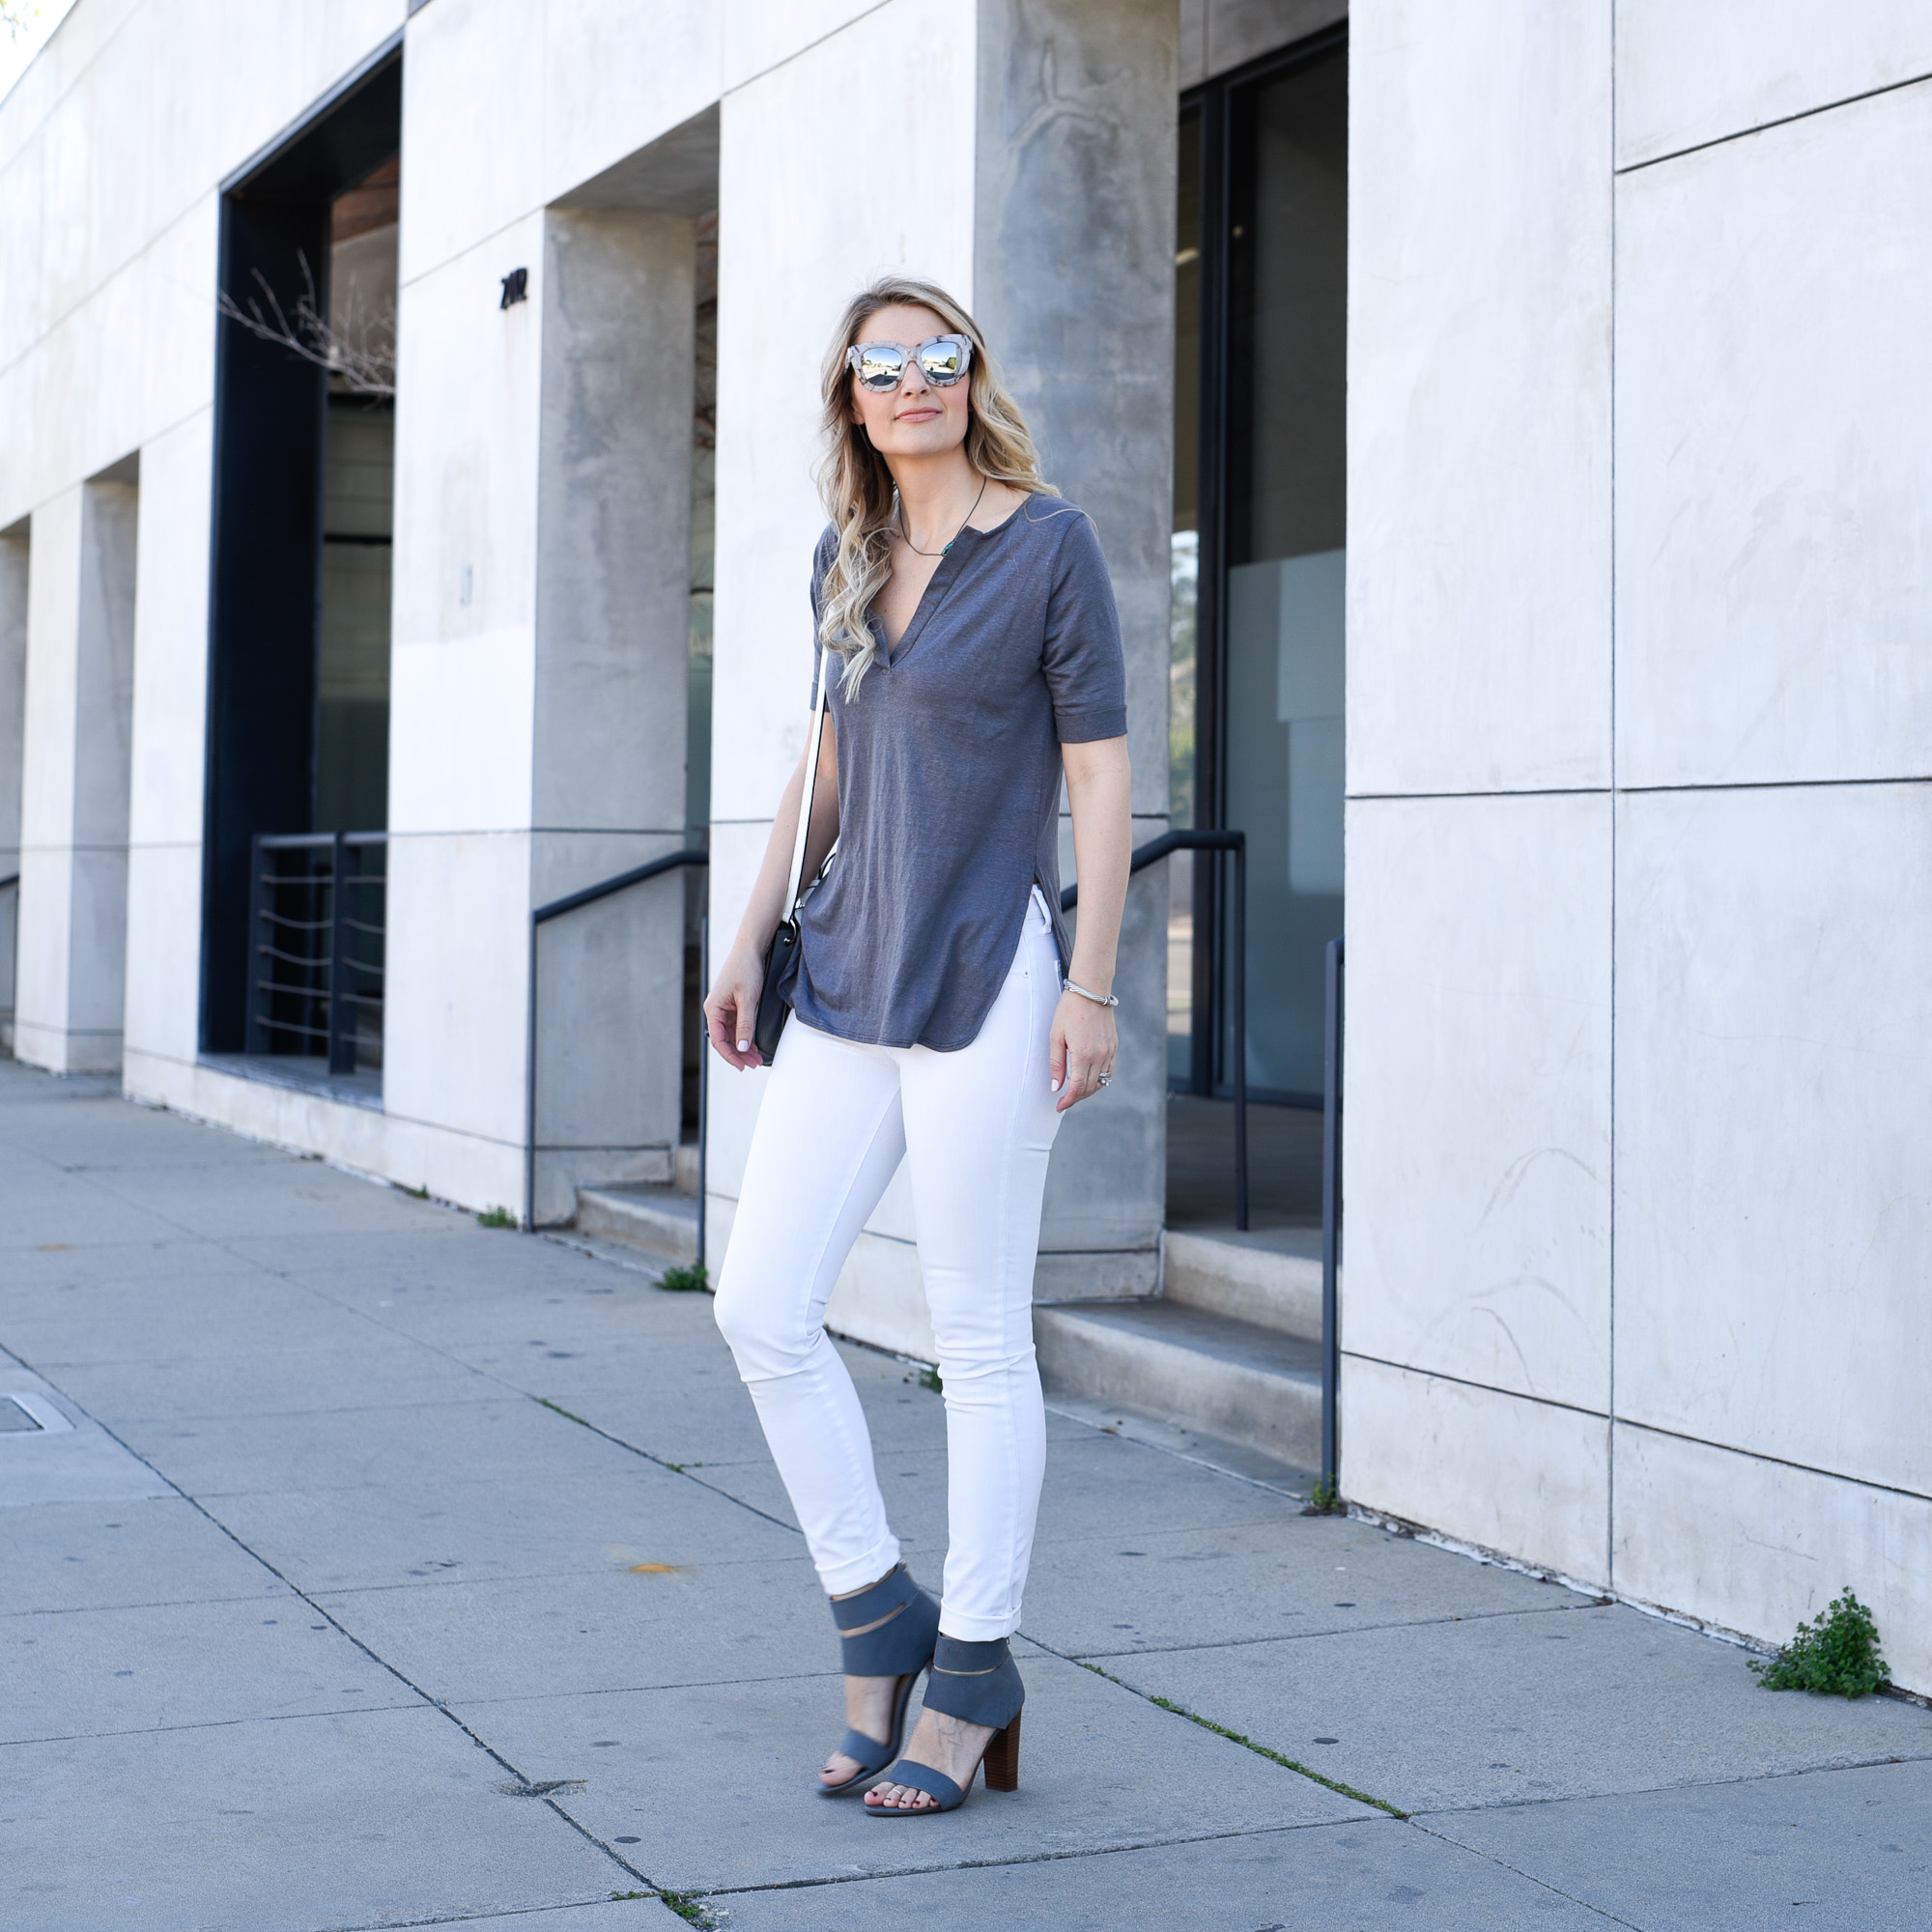 An easy weekend outfit that you can wear on errands or to brunch. 